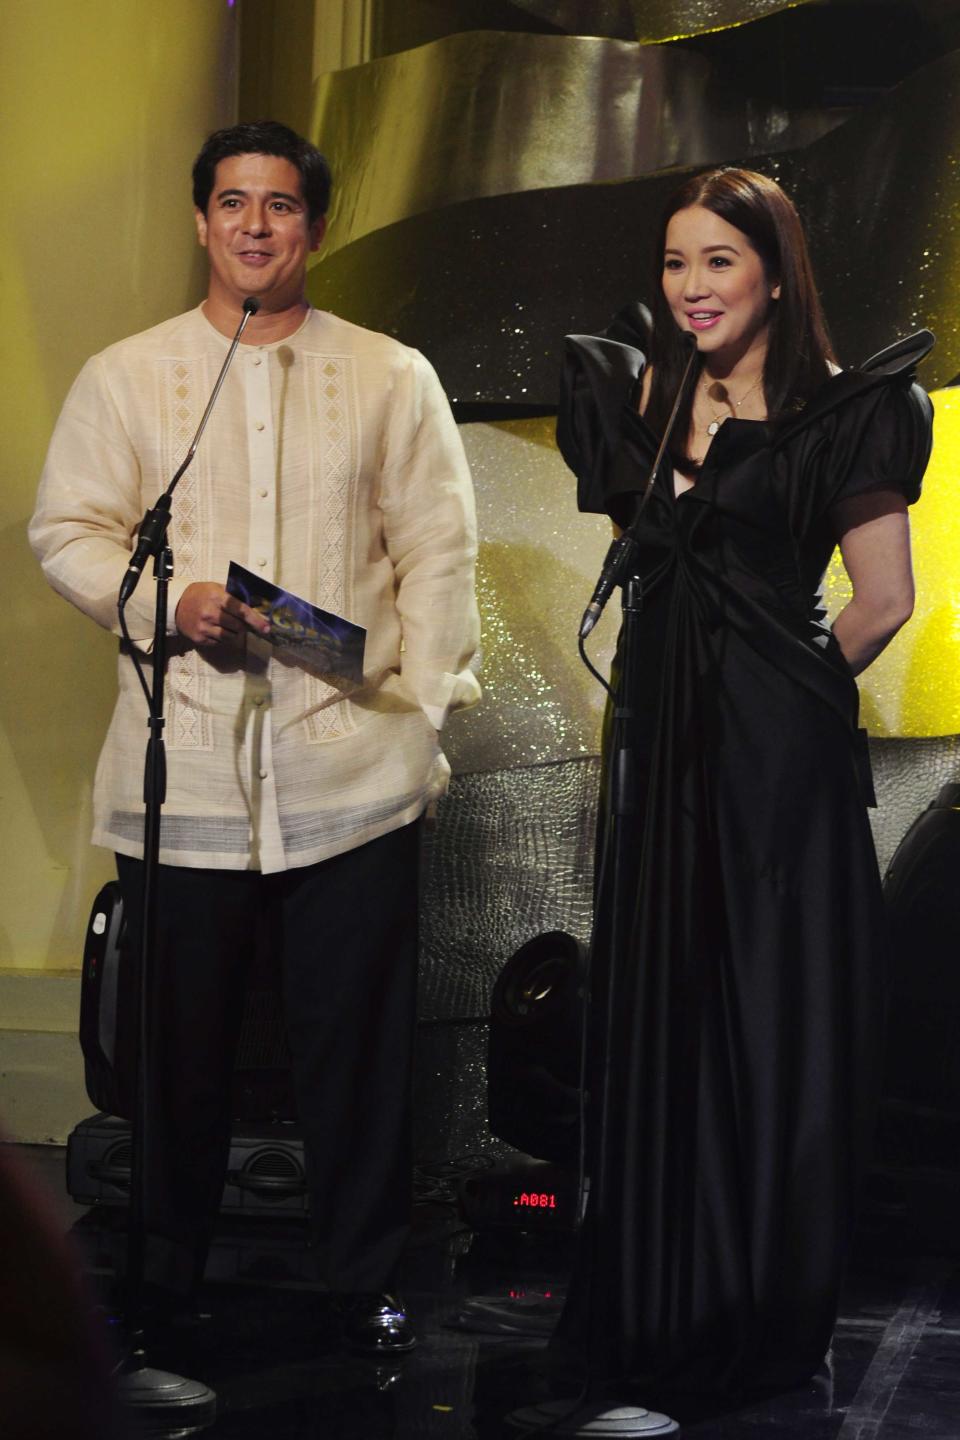 Aga Mulach and Kris Aquino host the 26th Star Awards for TV held at the Henry Lee Irwin Theater in Ateneo De Manila University on 18 November 2012. (Angela Galia/NPPA images)